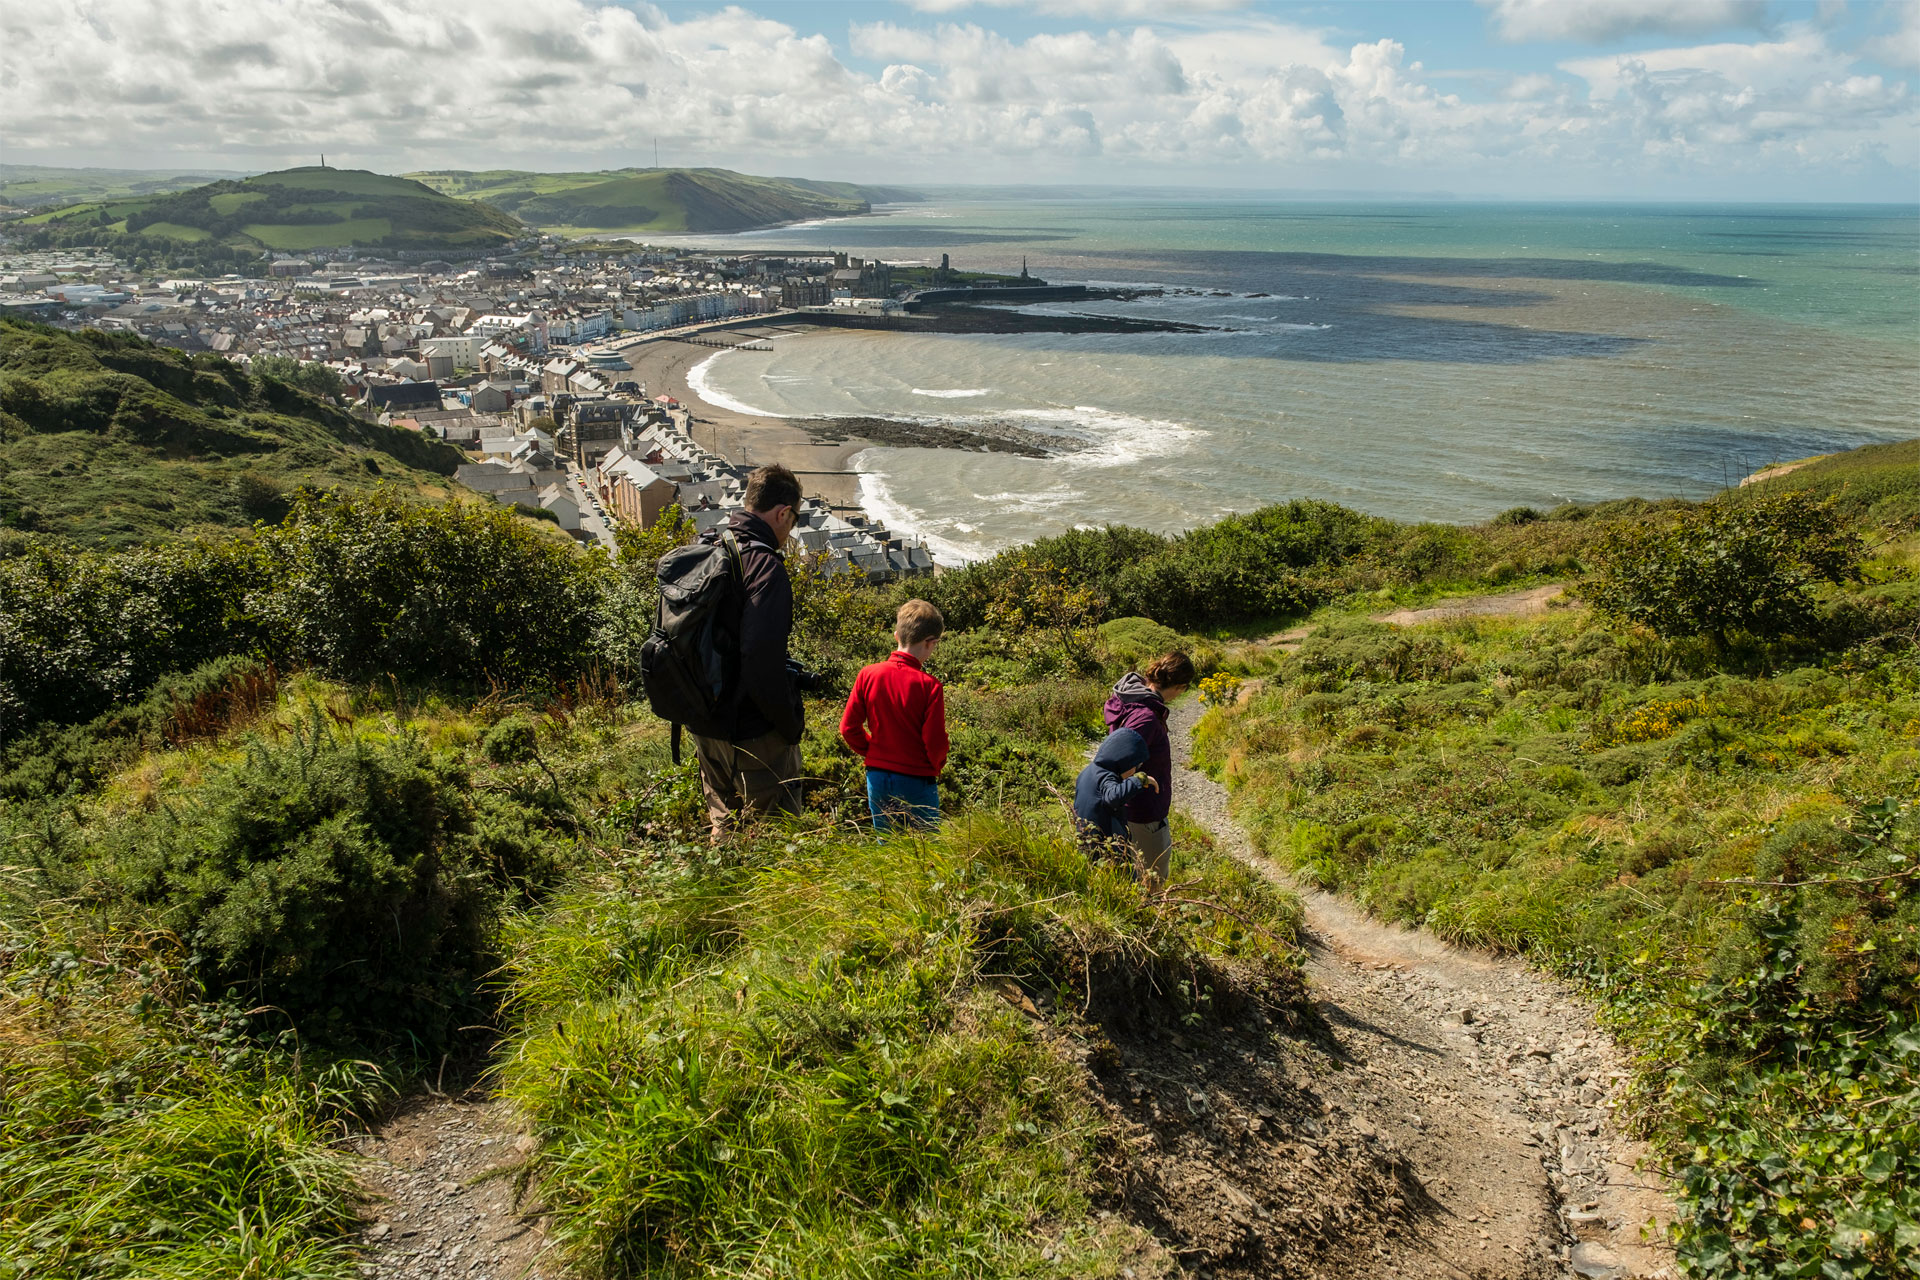 A view of Aberystwyth landscape from a cliff